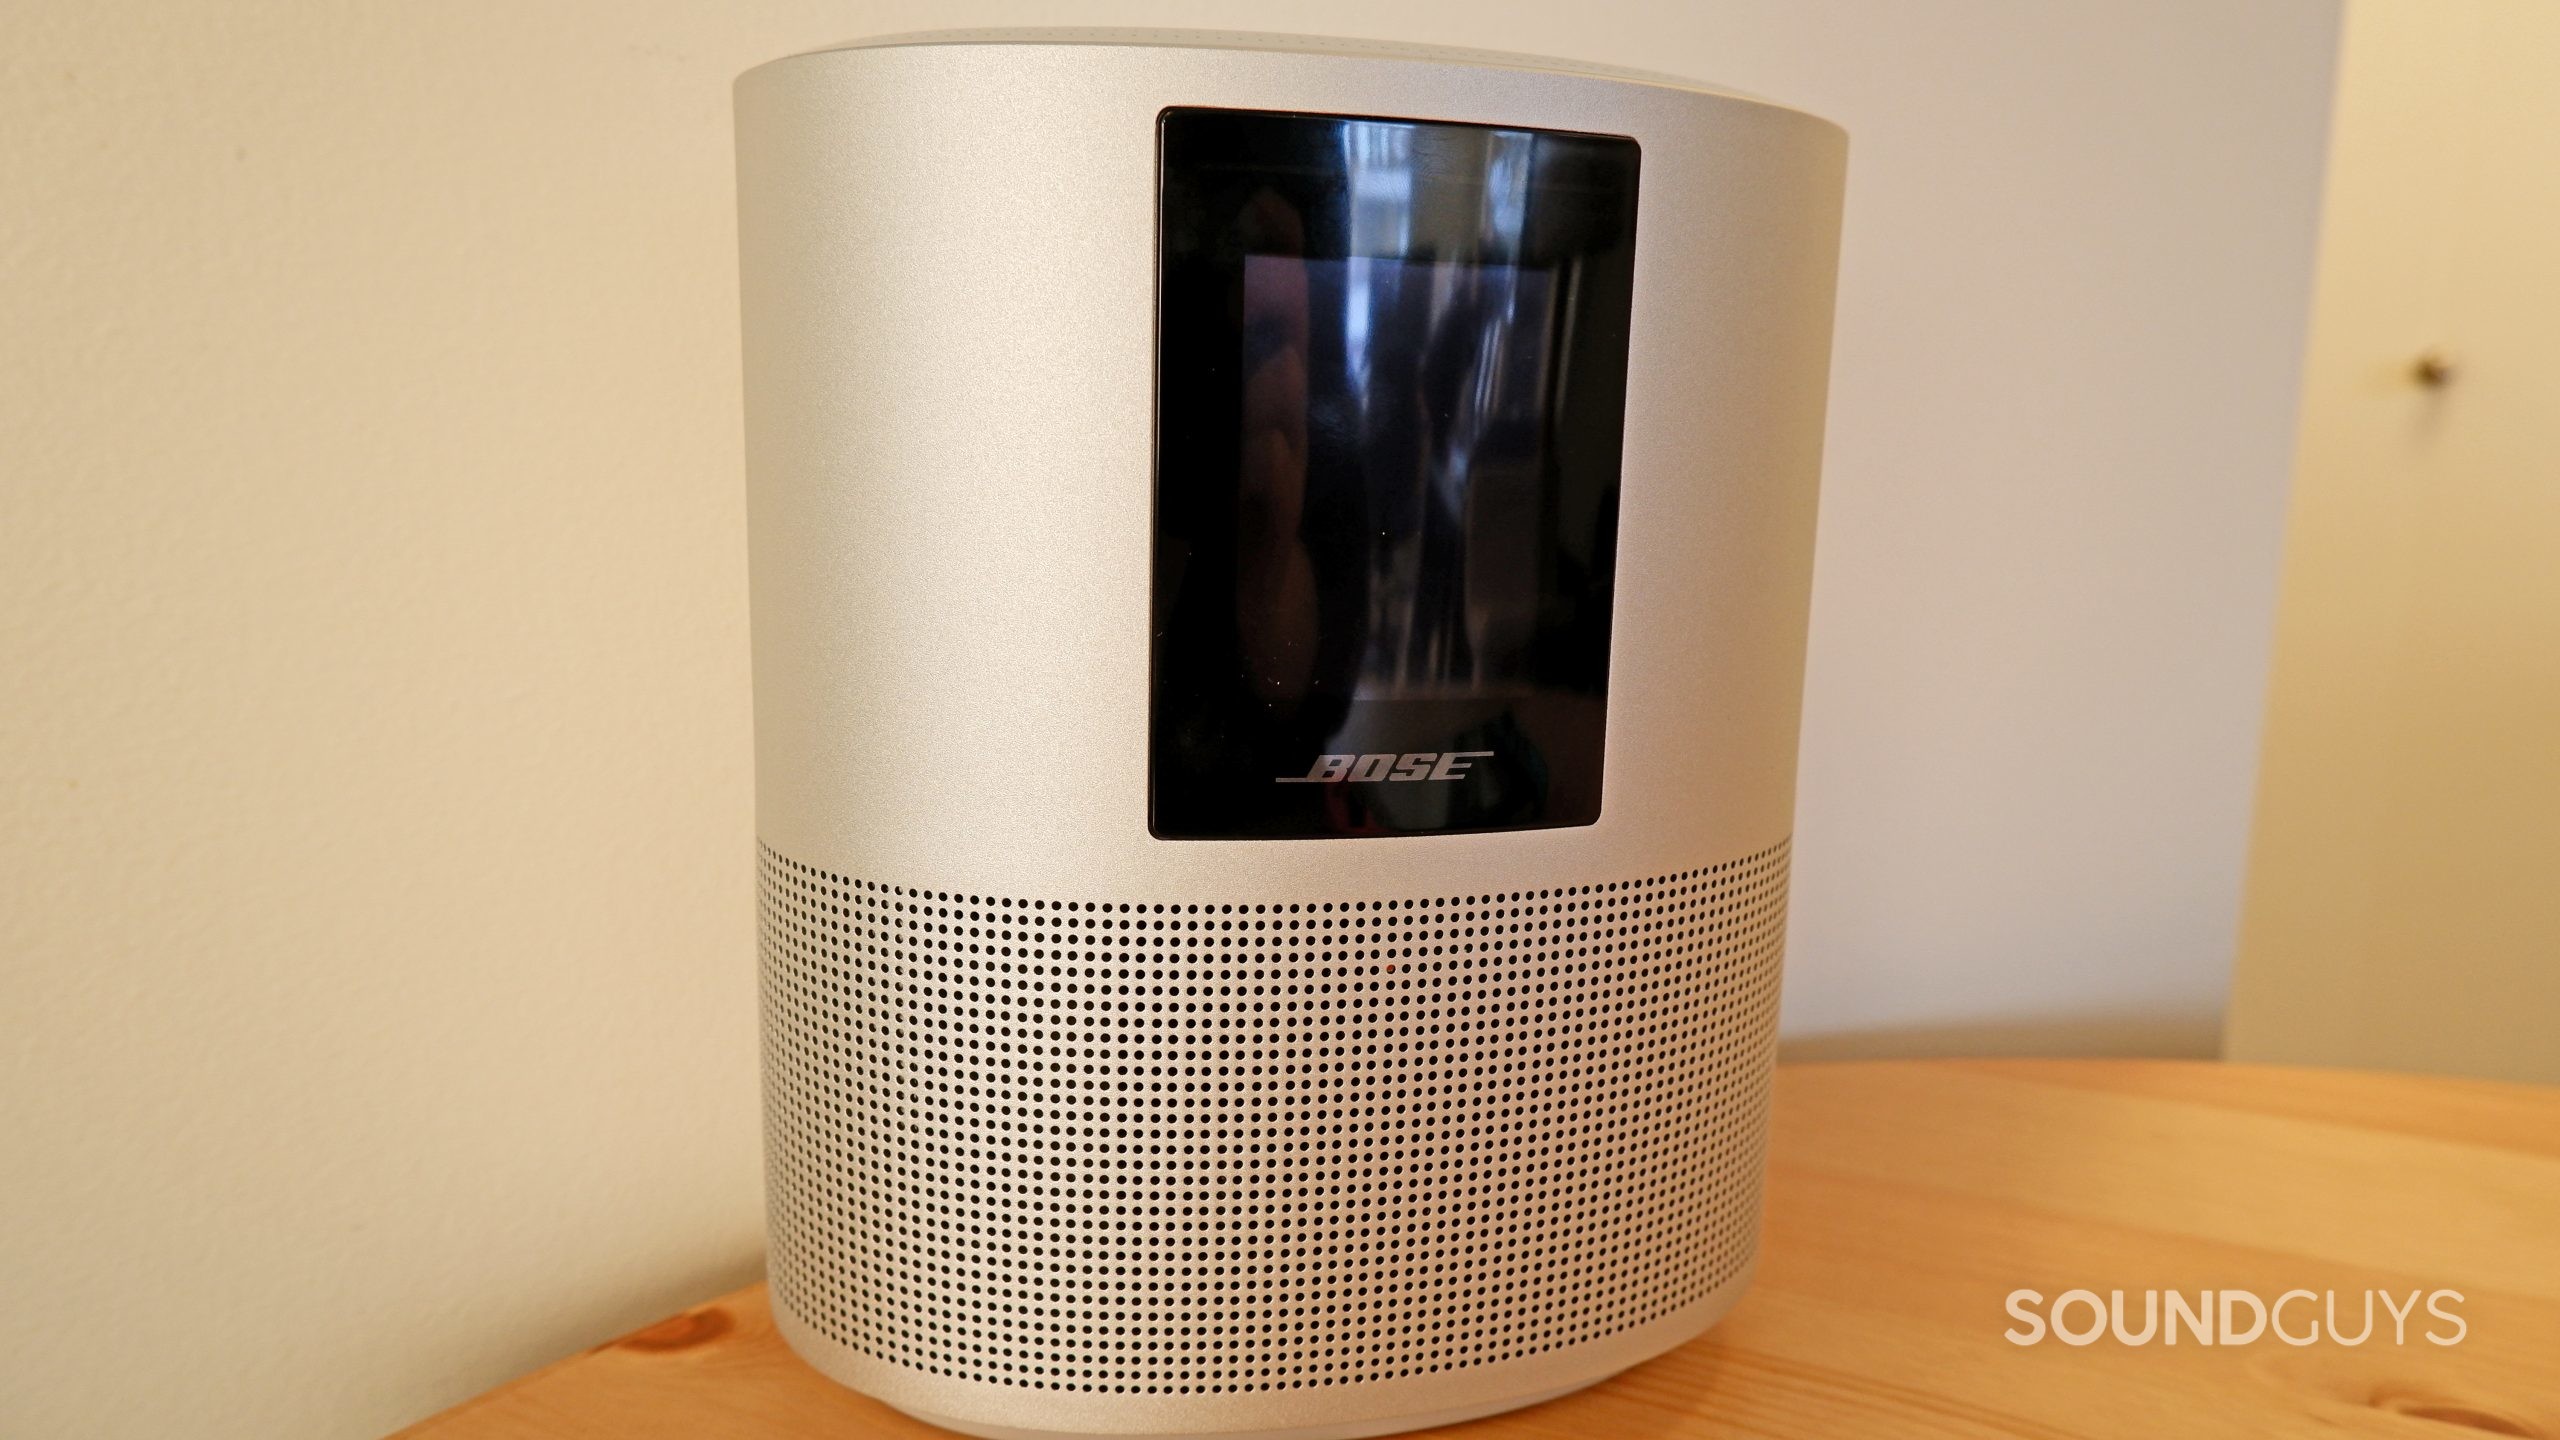 The Bose Home Speaker 500 sitting on a table.